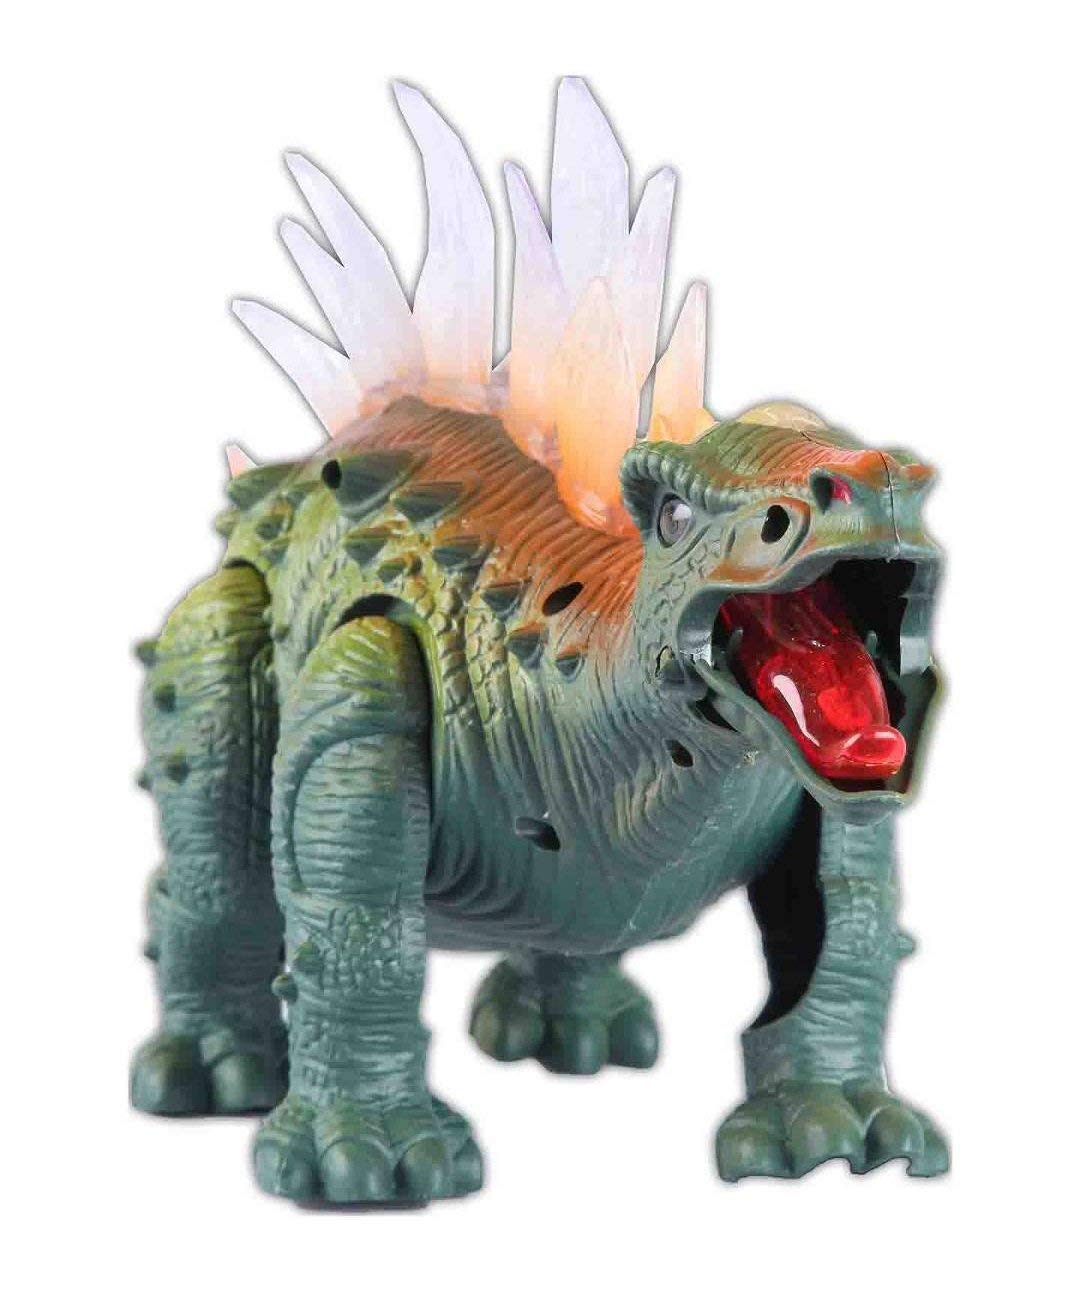 Electronic Walking Jurassic Stegosaurus Dinosaur Toy Figure with Swinging Tail Action, Roaring Sounds and LED Lights | Battery Operated Dinosaurs Gift for Kids Boys Girls